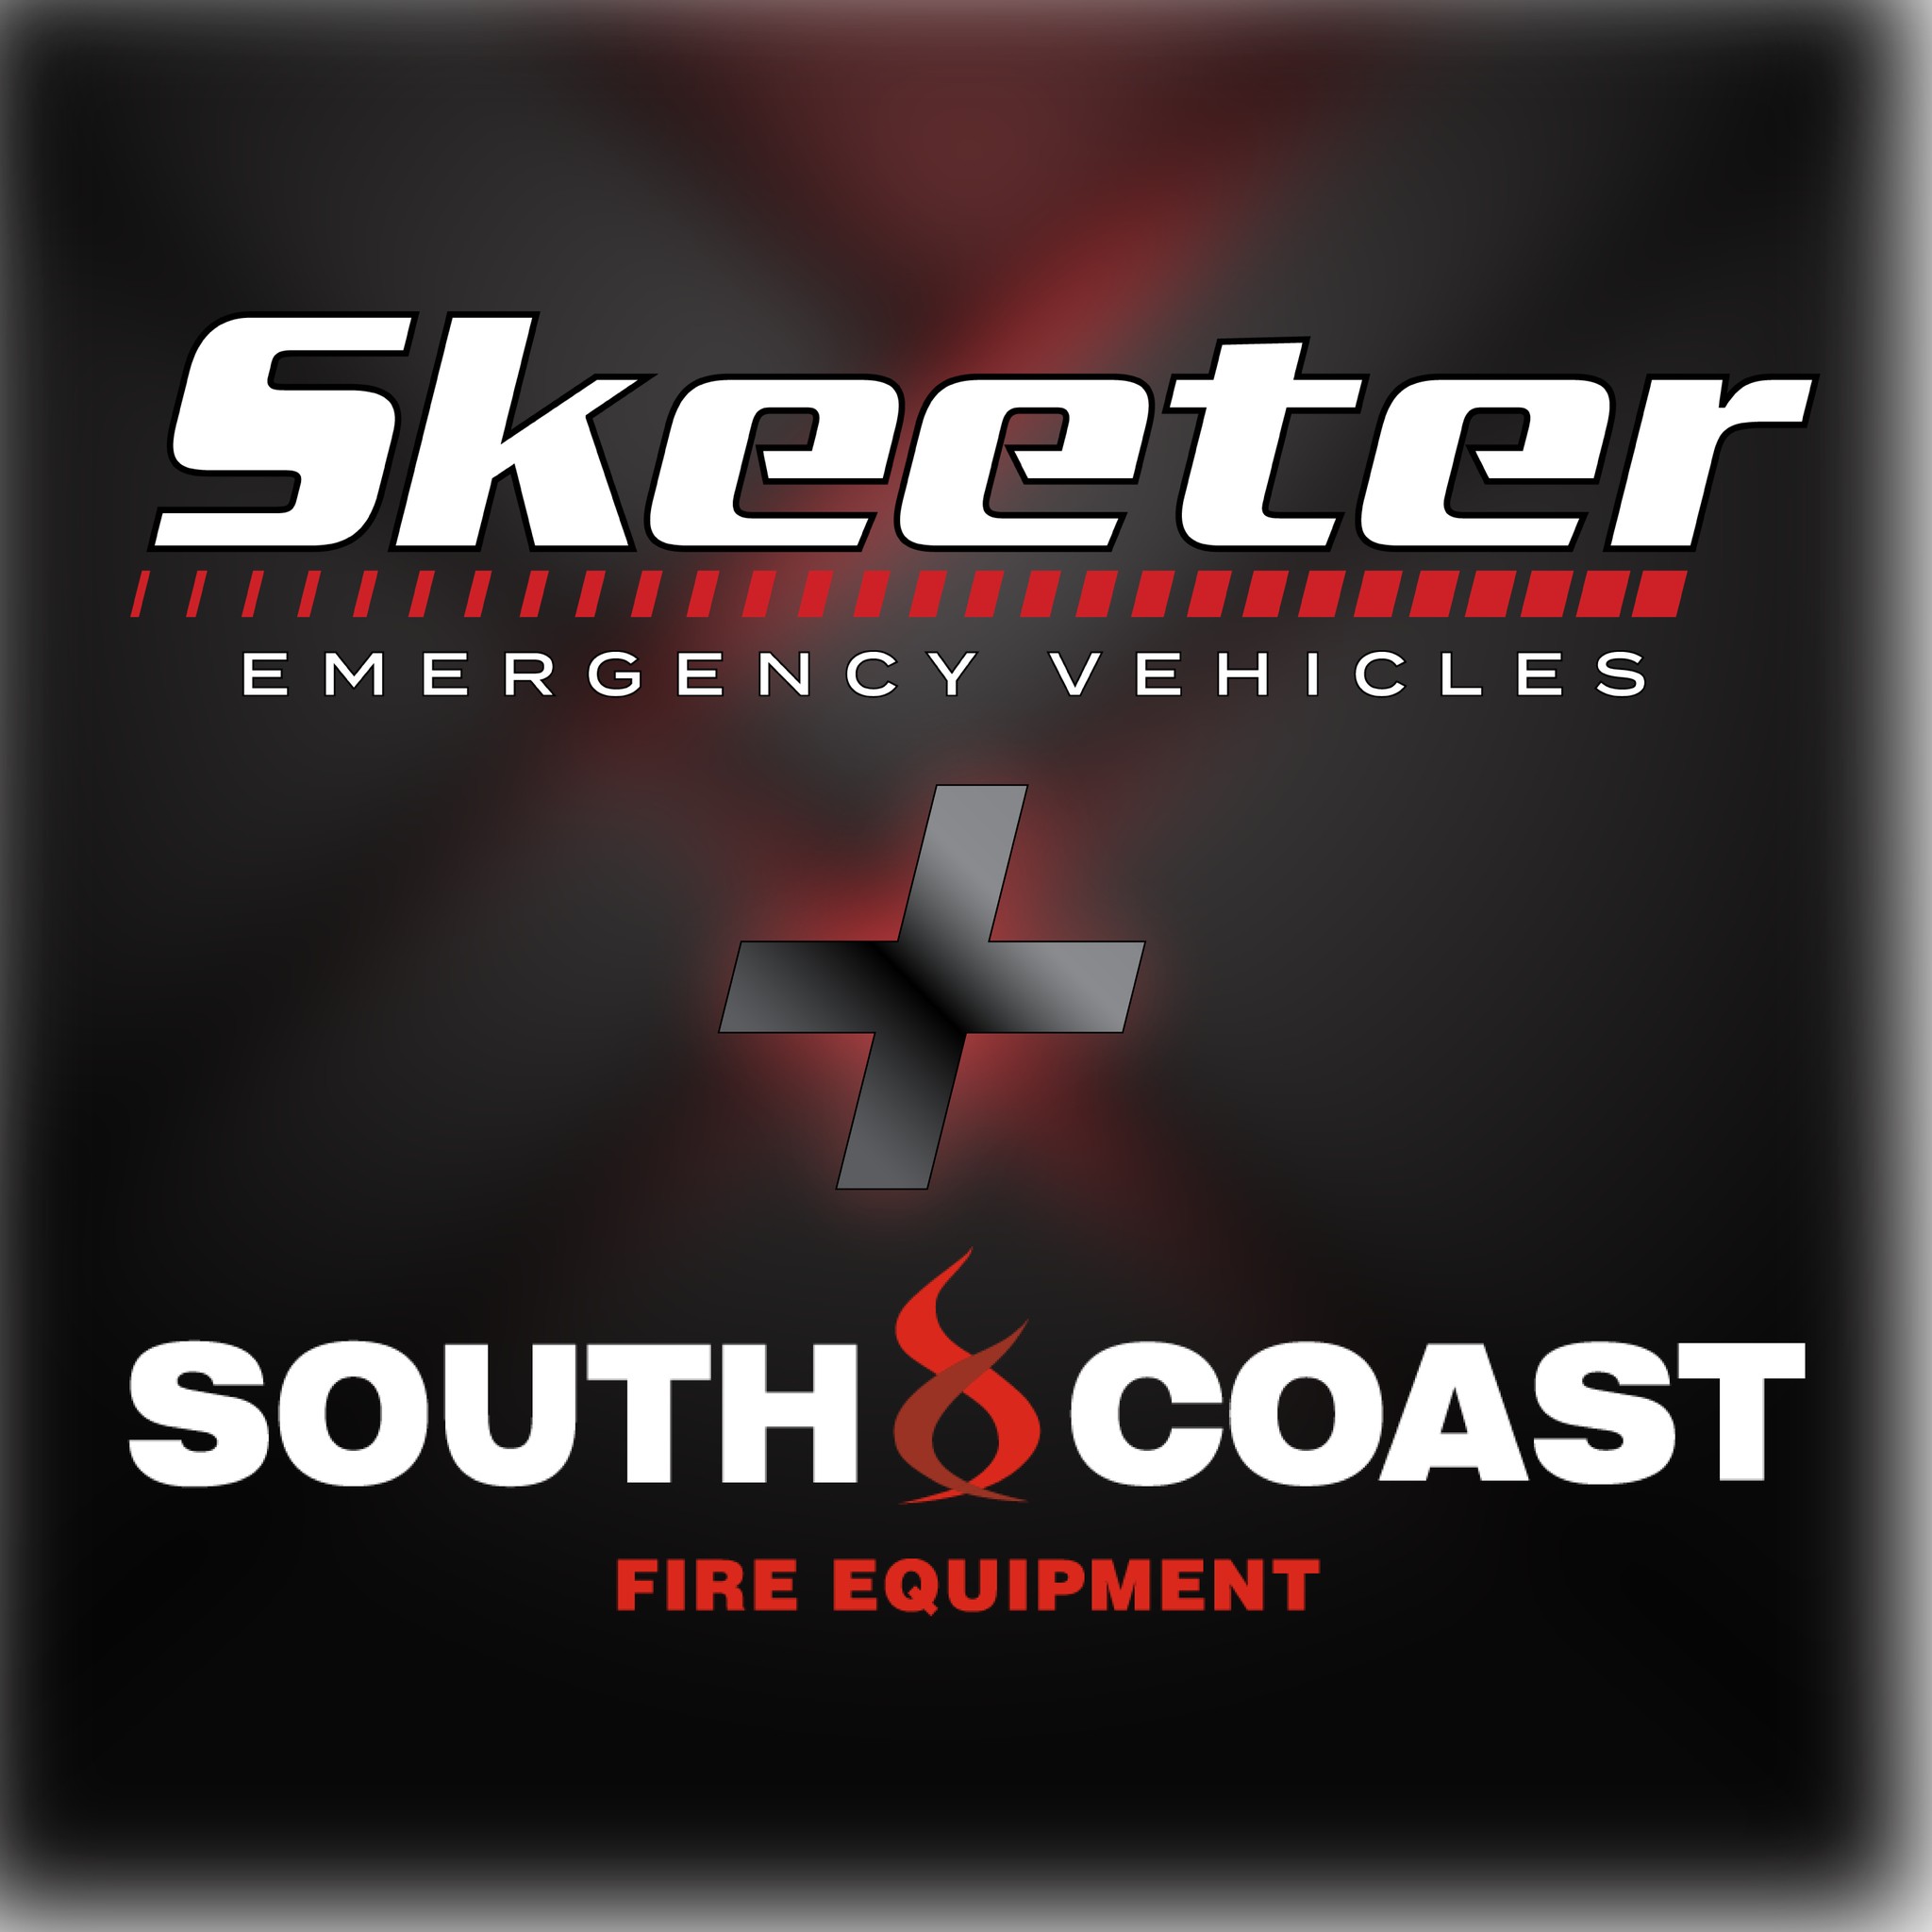 Skeeter Emergency Vehicles Expands Dealer Network with South Coast Fire Equipment